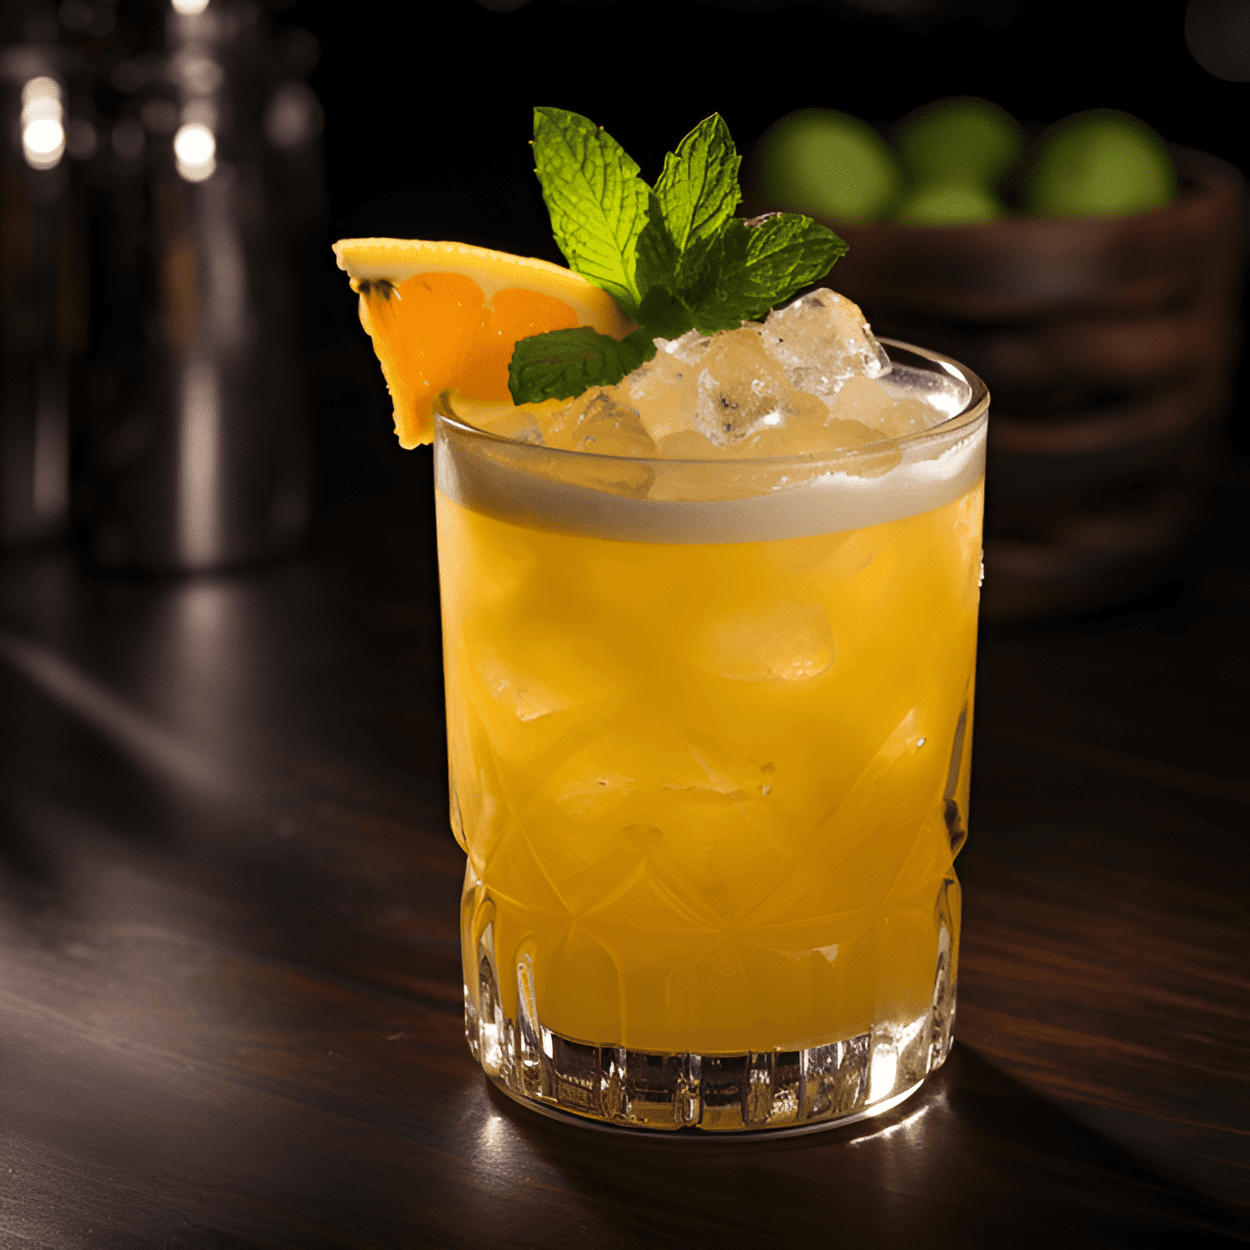 Cuban Screw Cocktail Recipe - The Cuban Screw is a sweet, tangy, and refreshing cocktail with a smooth, fruity flavor. The combination of rum, orange juice, and pineapple juice creates a tropical taste that is both light and satisfying. The addition of grenadine adds a touch of sweetness and a beautiful color to the drink.